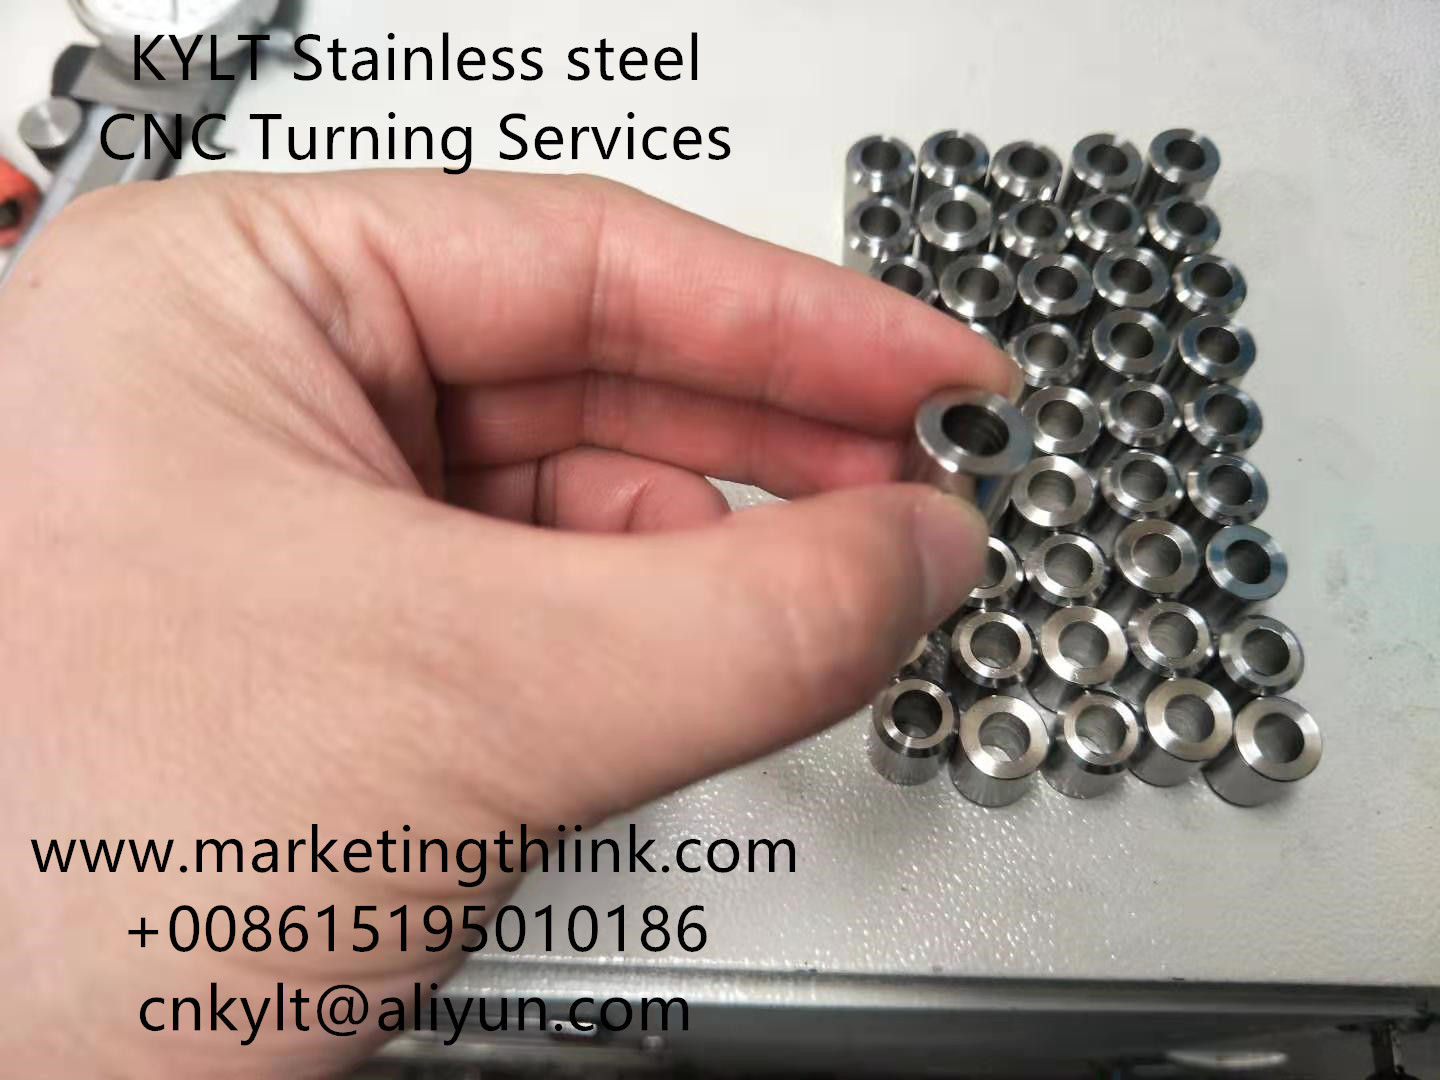 KYLT Stainless steel cnc turning service